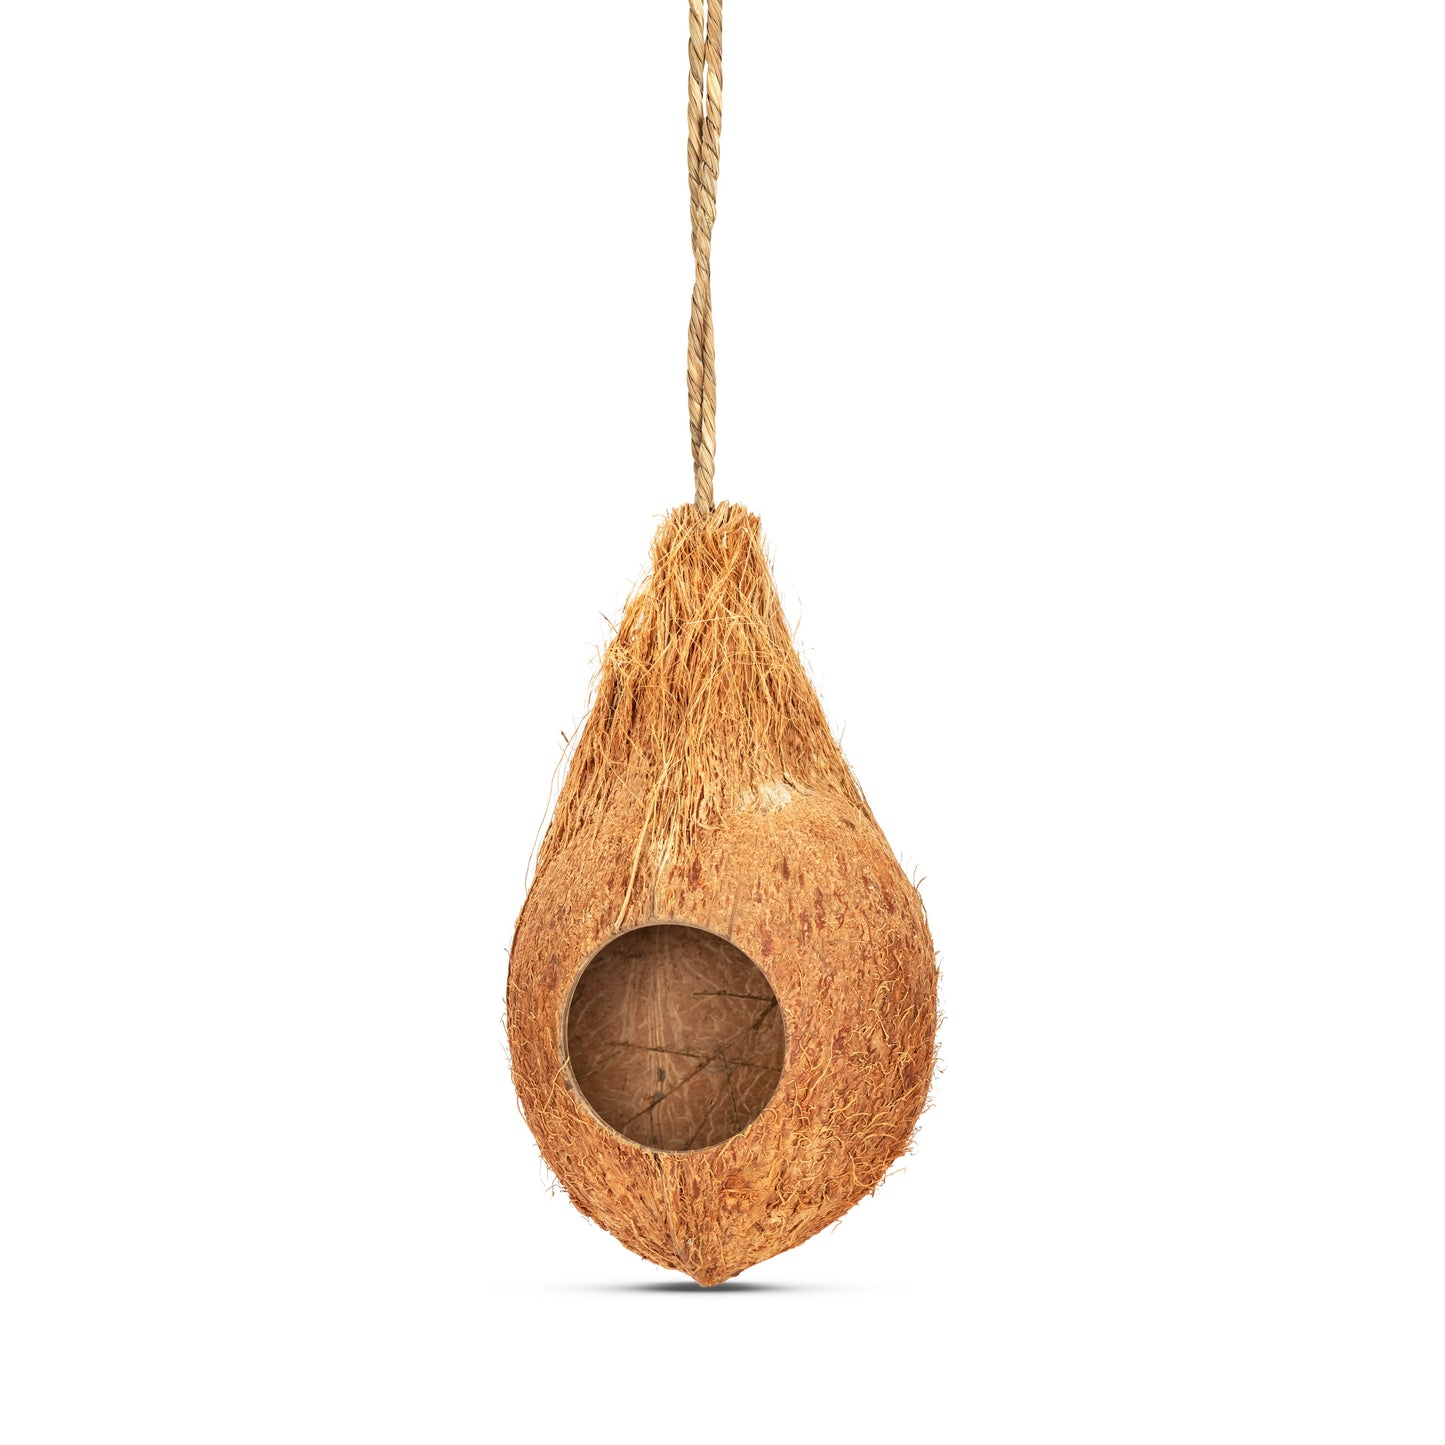 coconut bird house with coco fiber and one hole